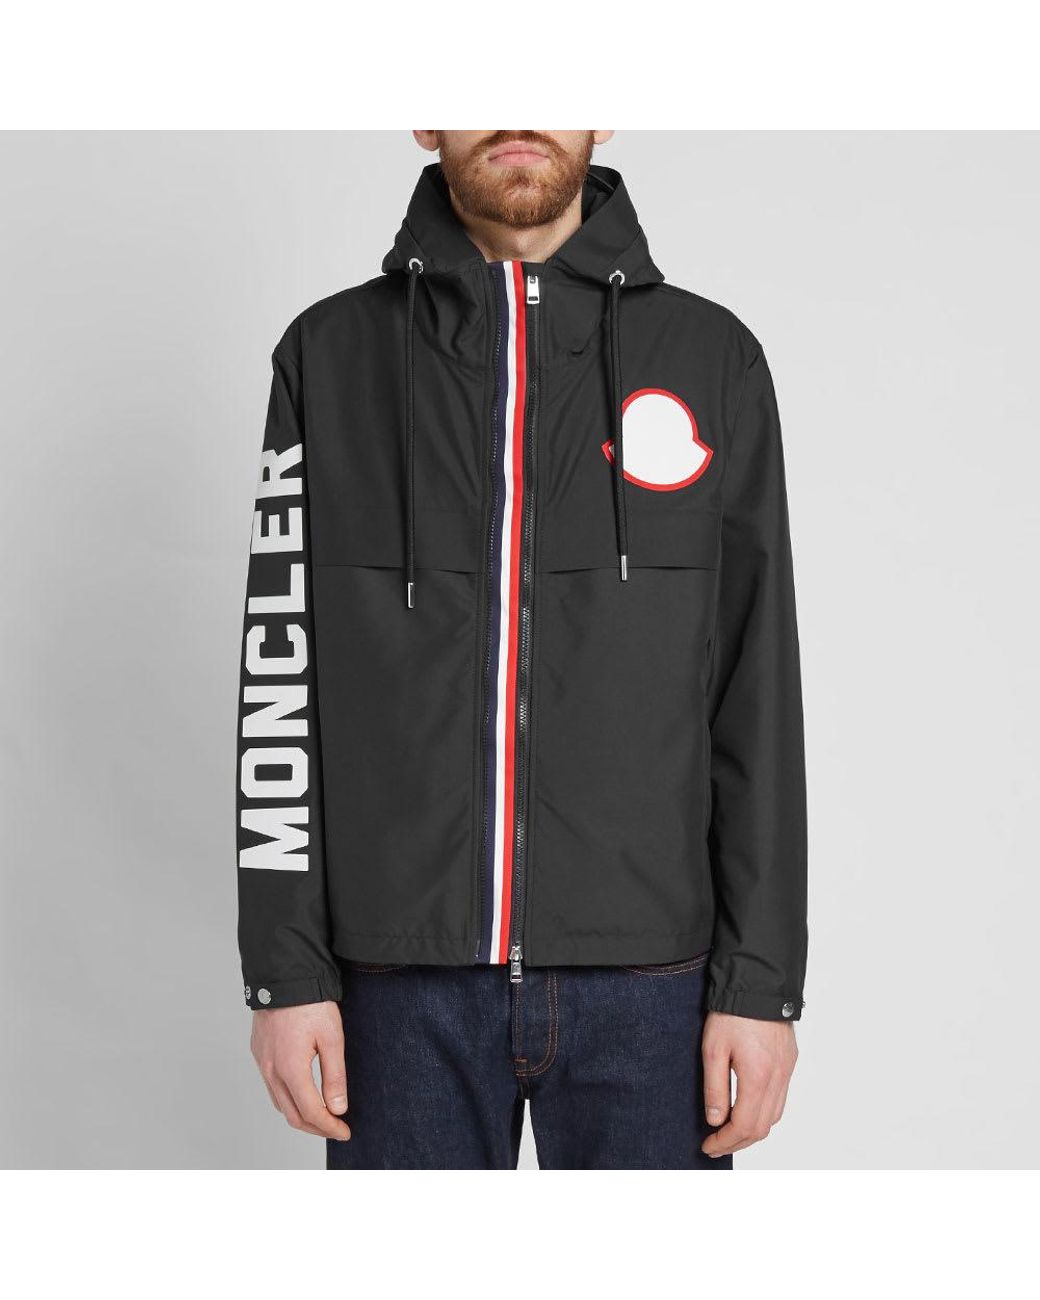 Moncler 'montreal' Hooded Jacket in Black for Men | Lyst Canada